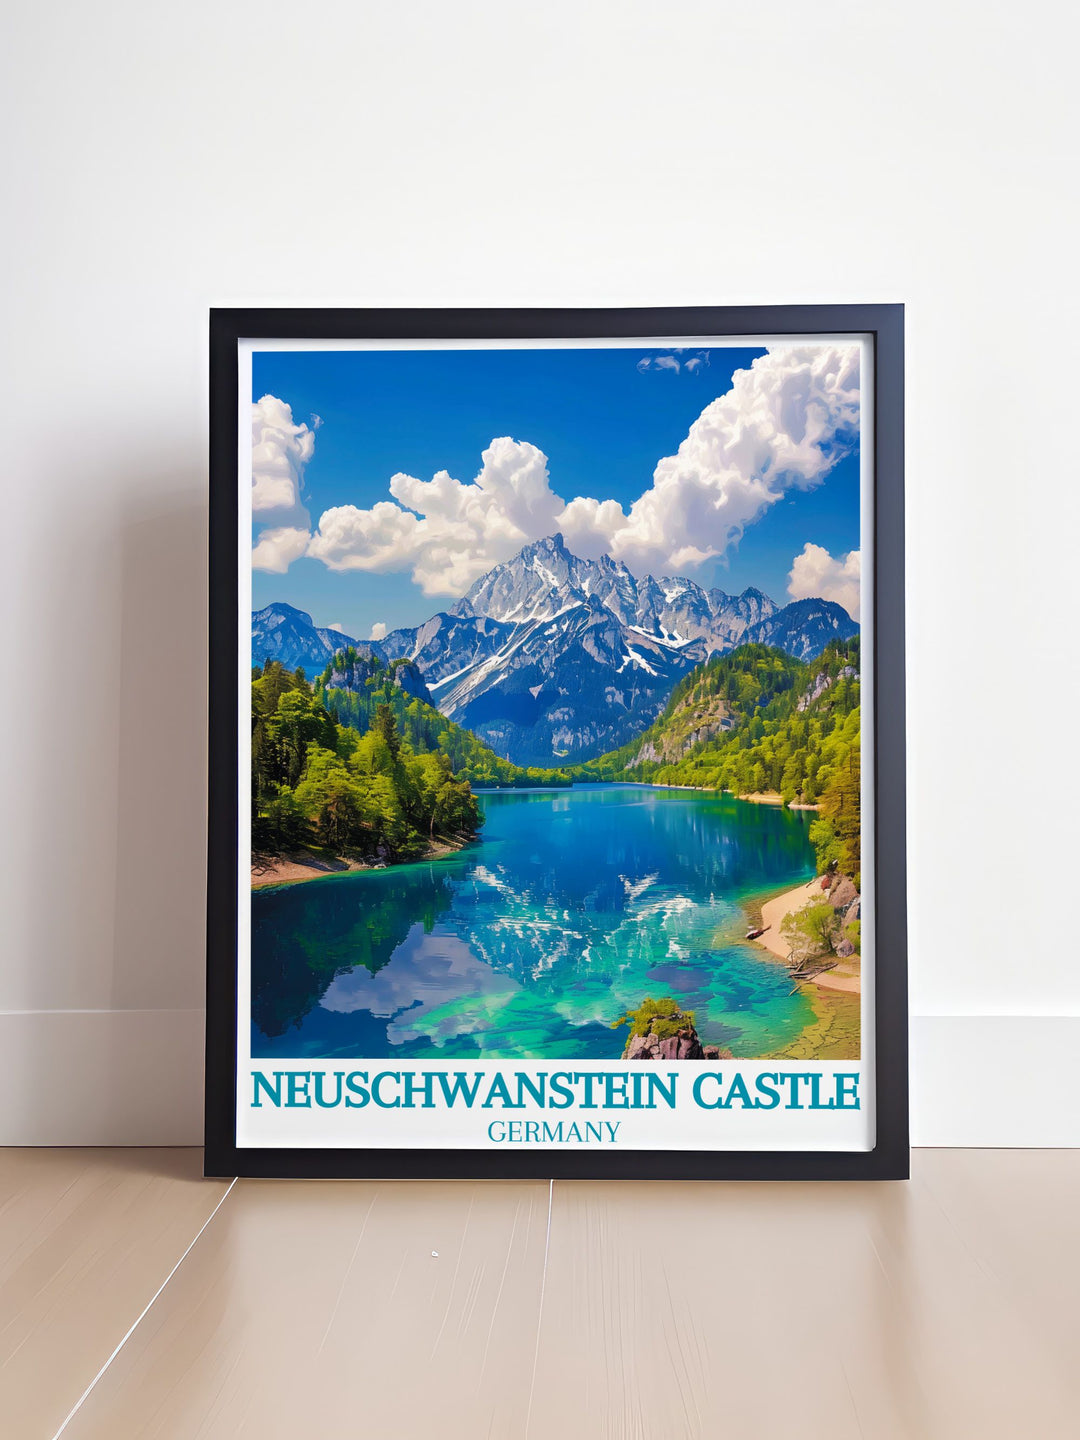 Featuring the iconic architecture and serene waters of Neuschwanstein Castle and Alpsee Lake, this poster showcases the regions inviting landscapes, perfect for those who cherish natural and cultural destinations.